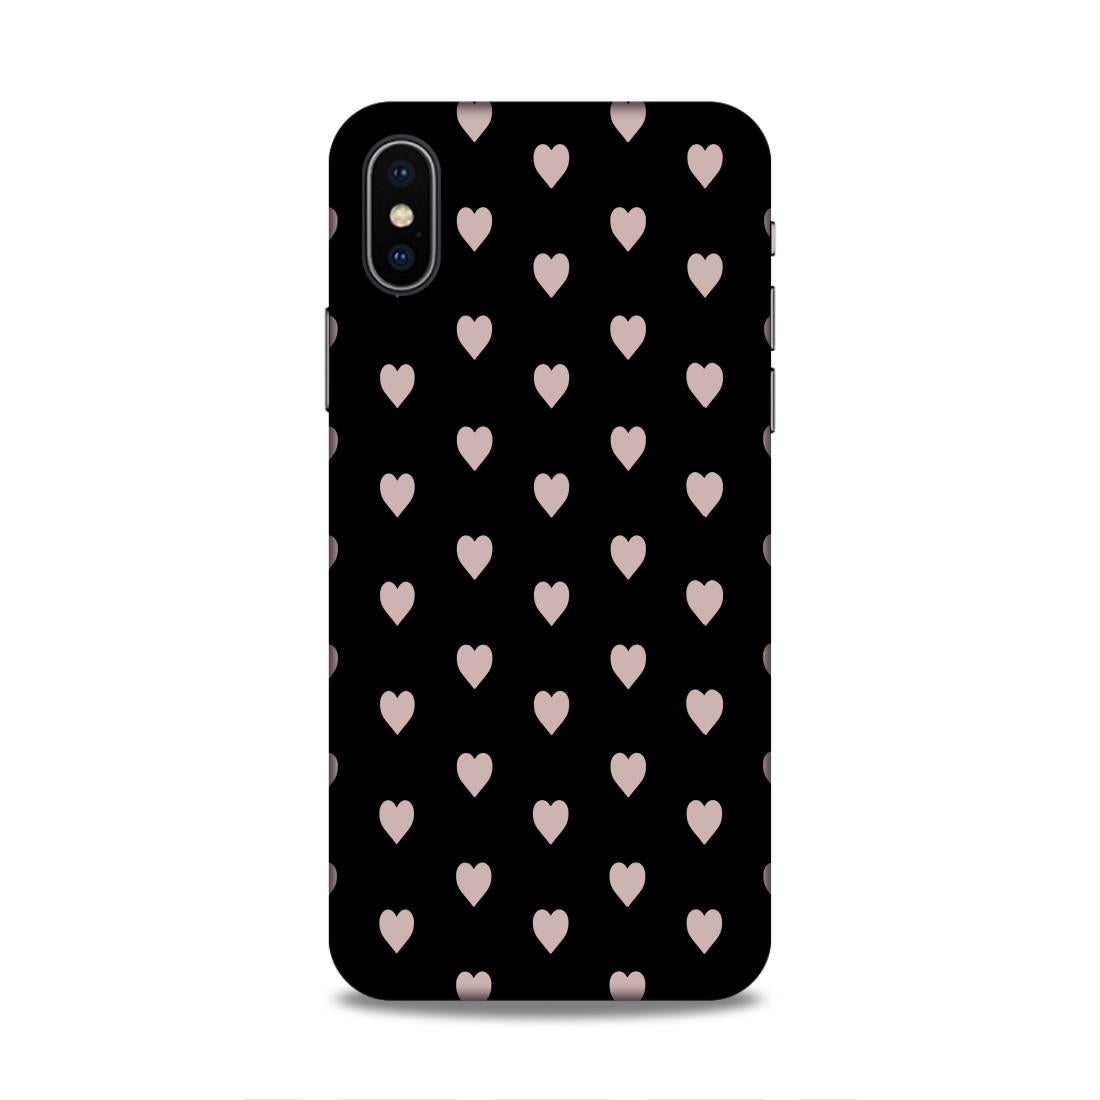 Love Pattern Hard Back Case For Apple iPhone X/XS